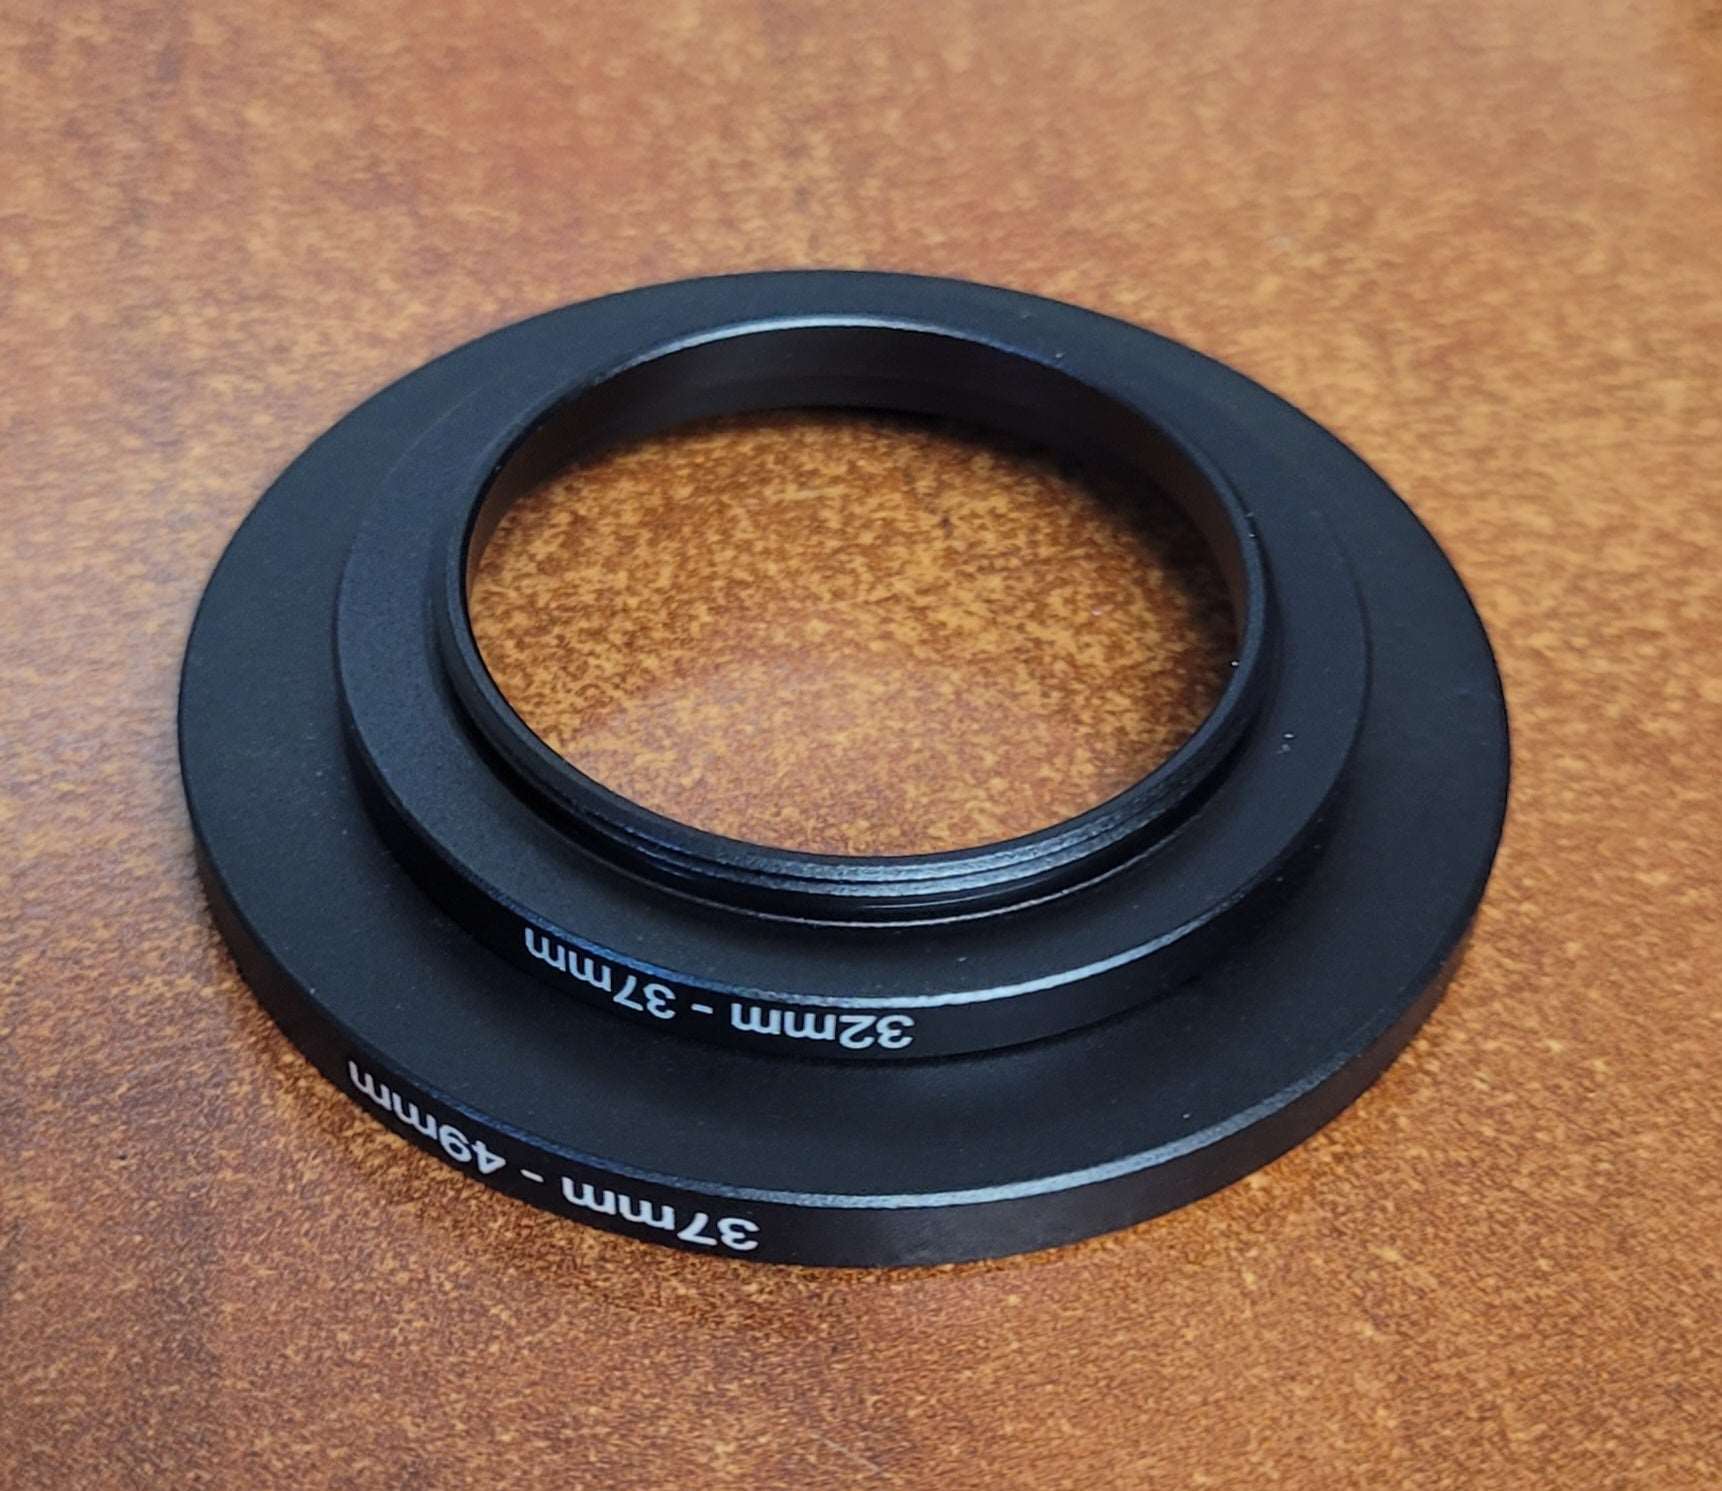 32mm-37mm Step up Ring Adapter